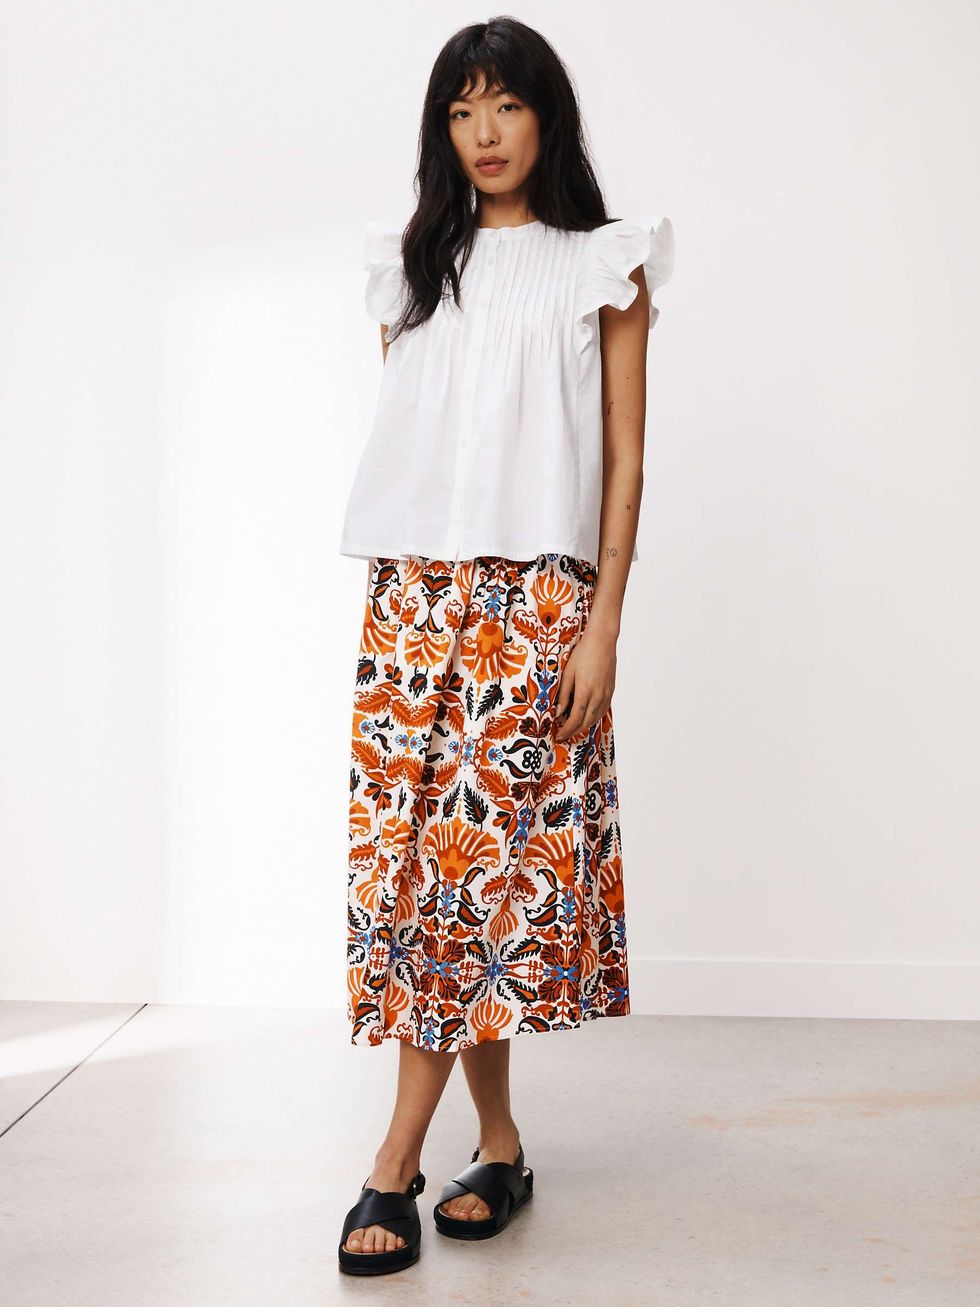 Summer skirts: 11 skirt styles to suit every shape